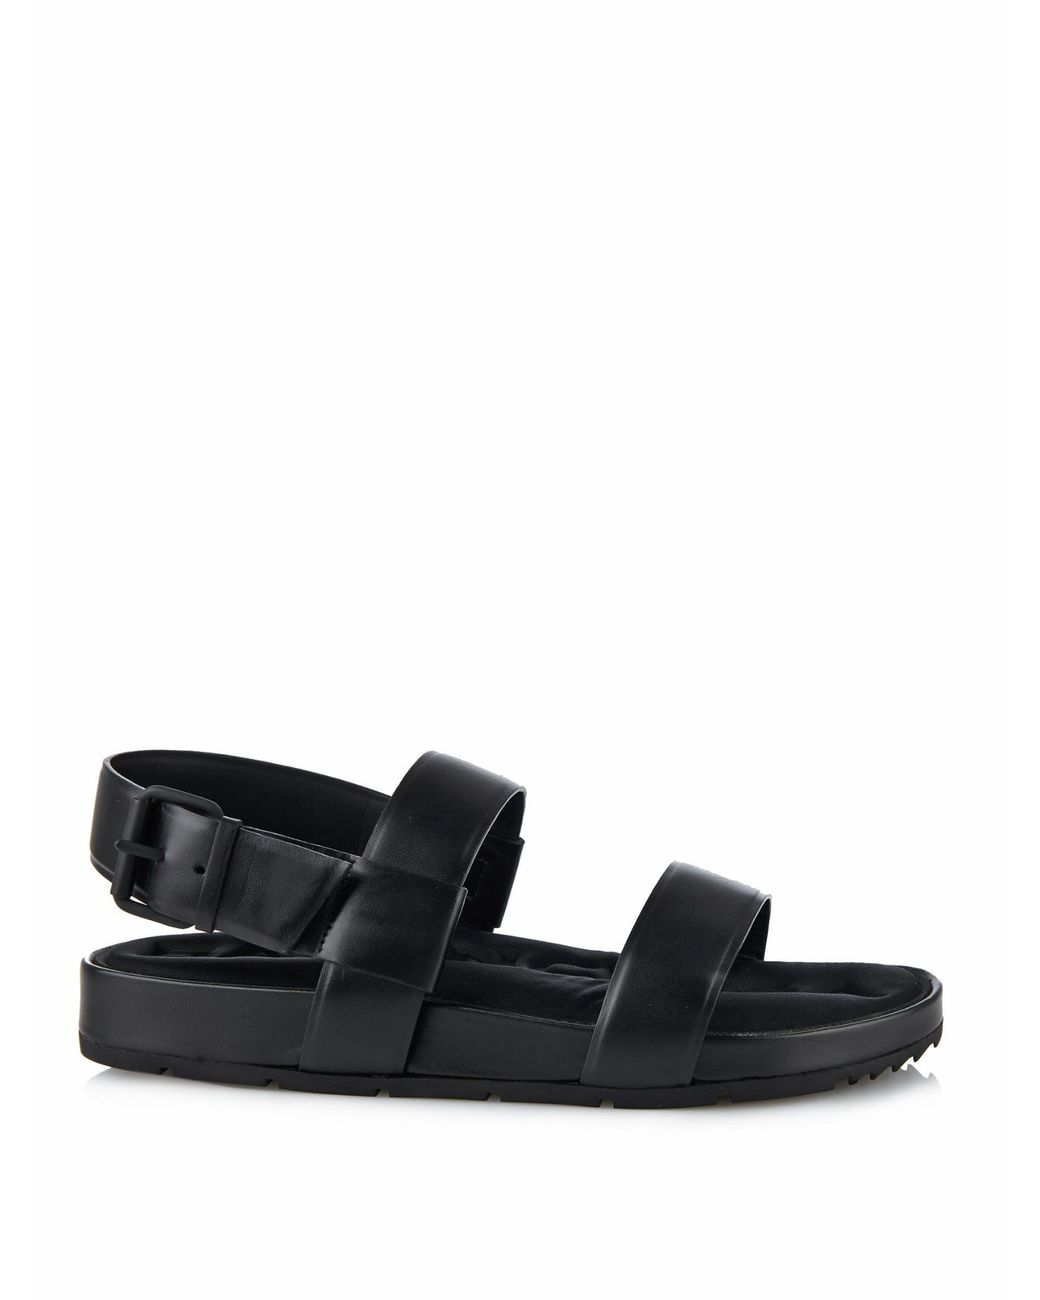 Balenciaga Double-Strap Leather Sandals in Black | Lyst